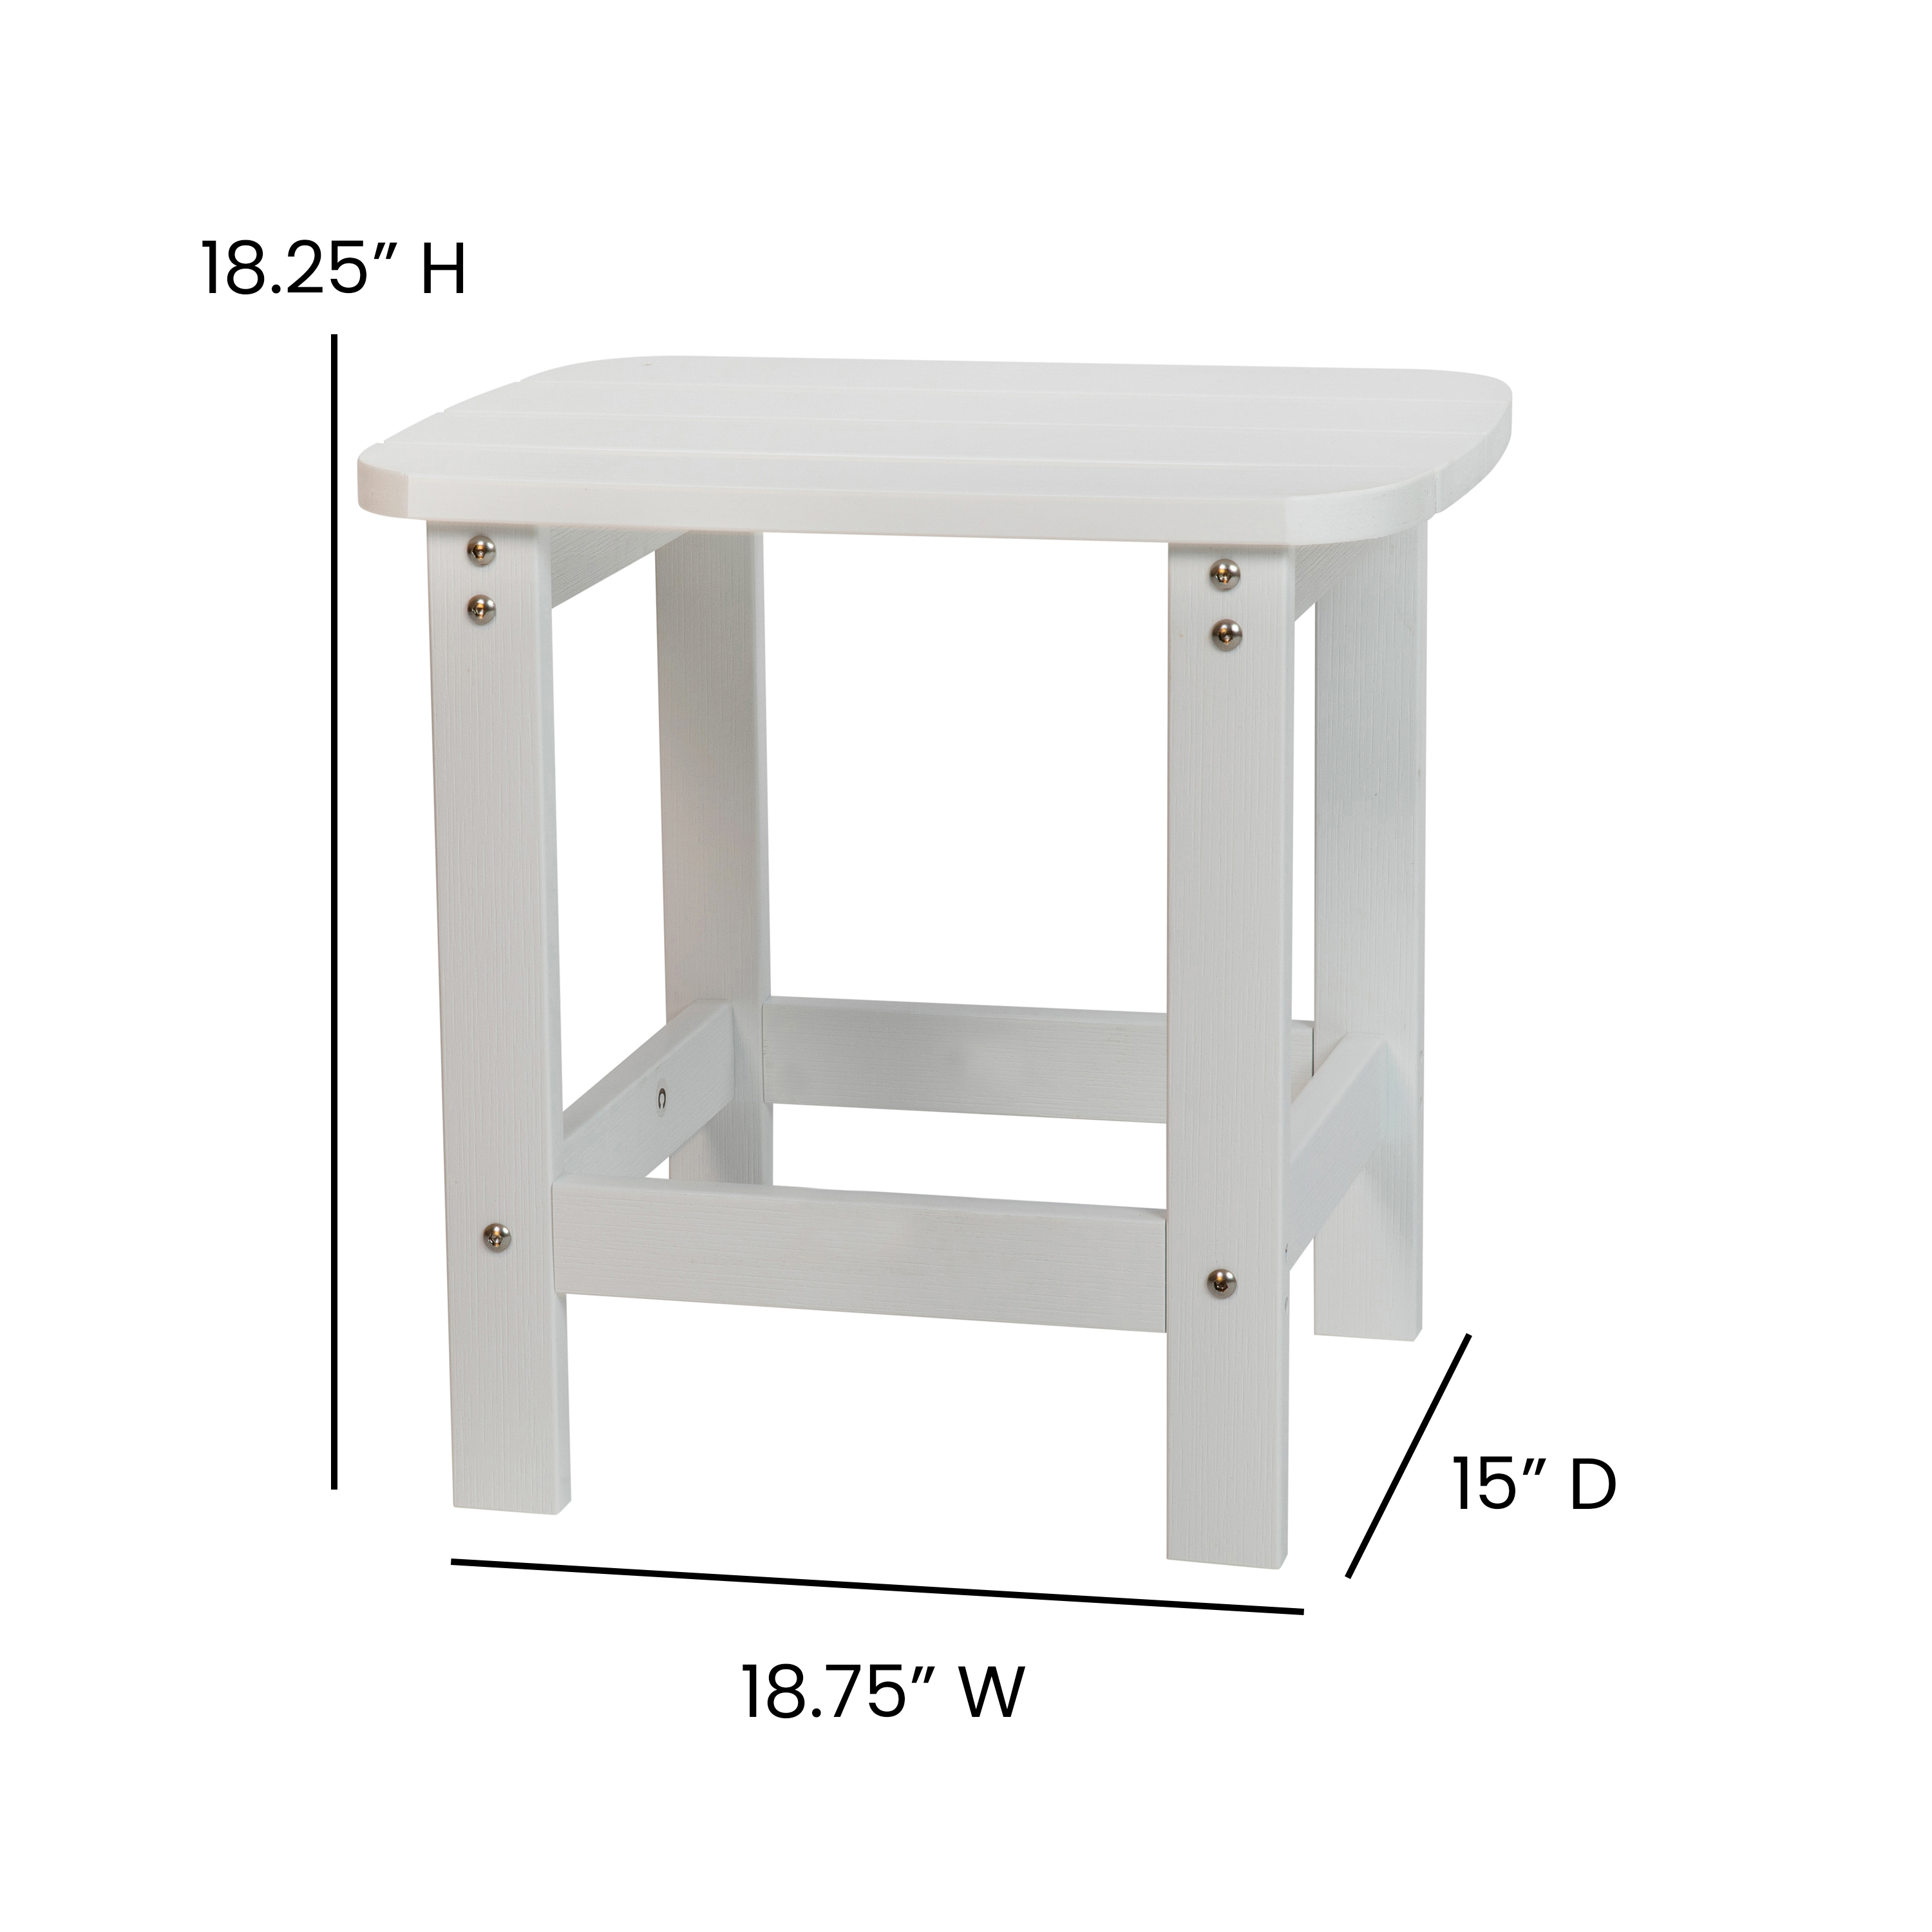 Emma + Oliver Indoor/Outdoor Polyresin Adirondack Side Table for Porch, Patio, or Sunroom in White - image 5 of 9